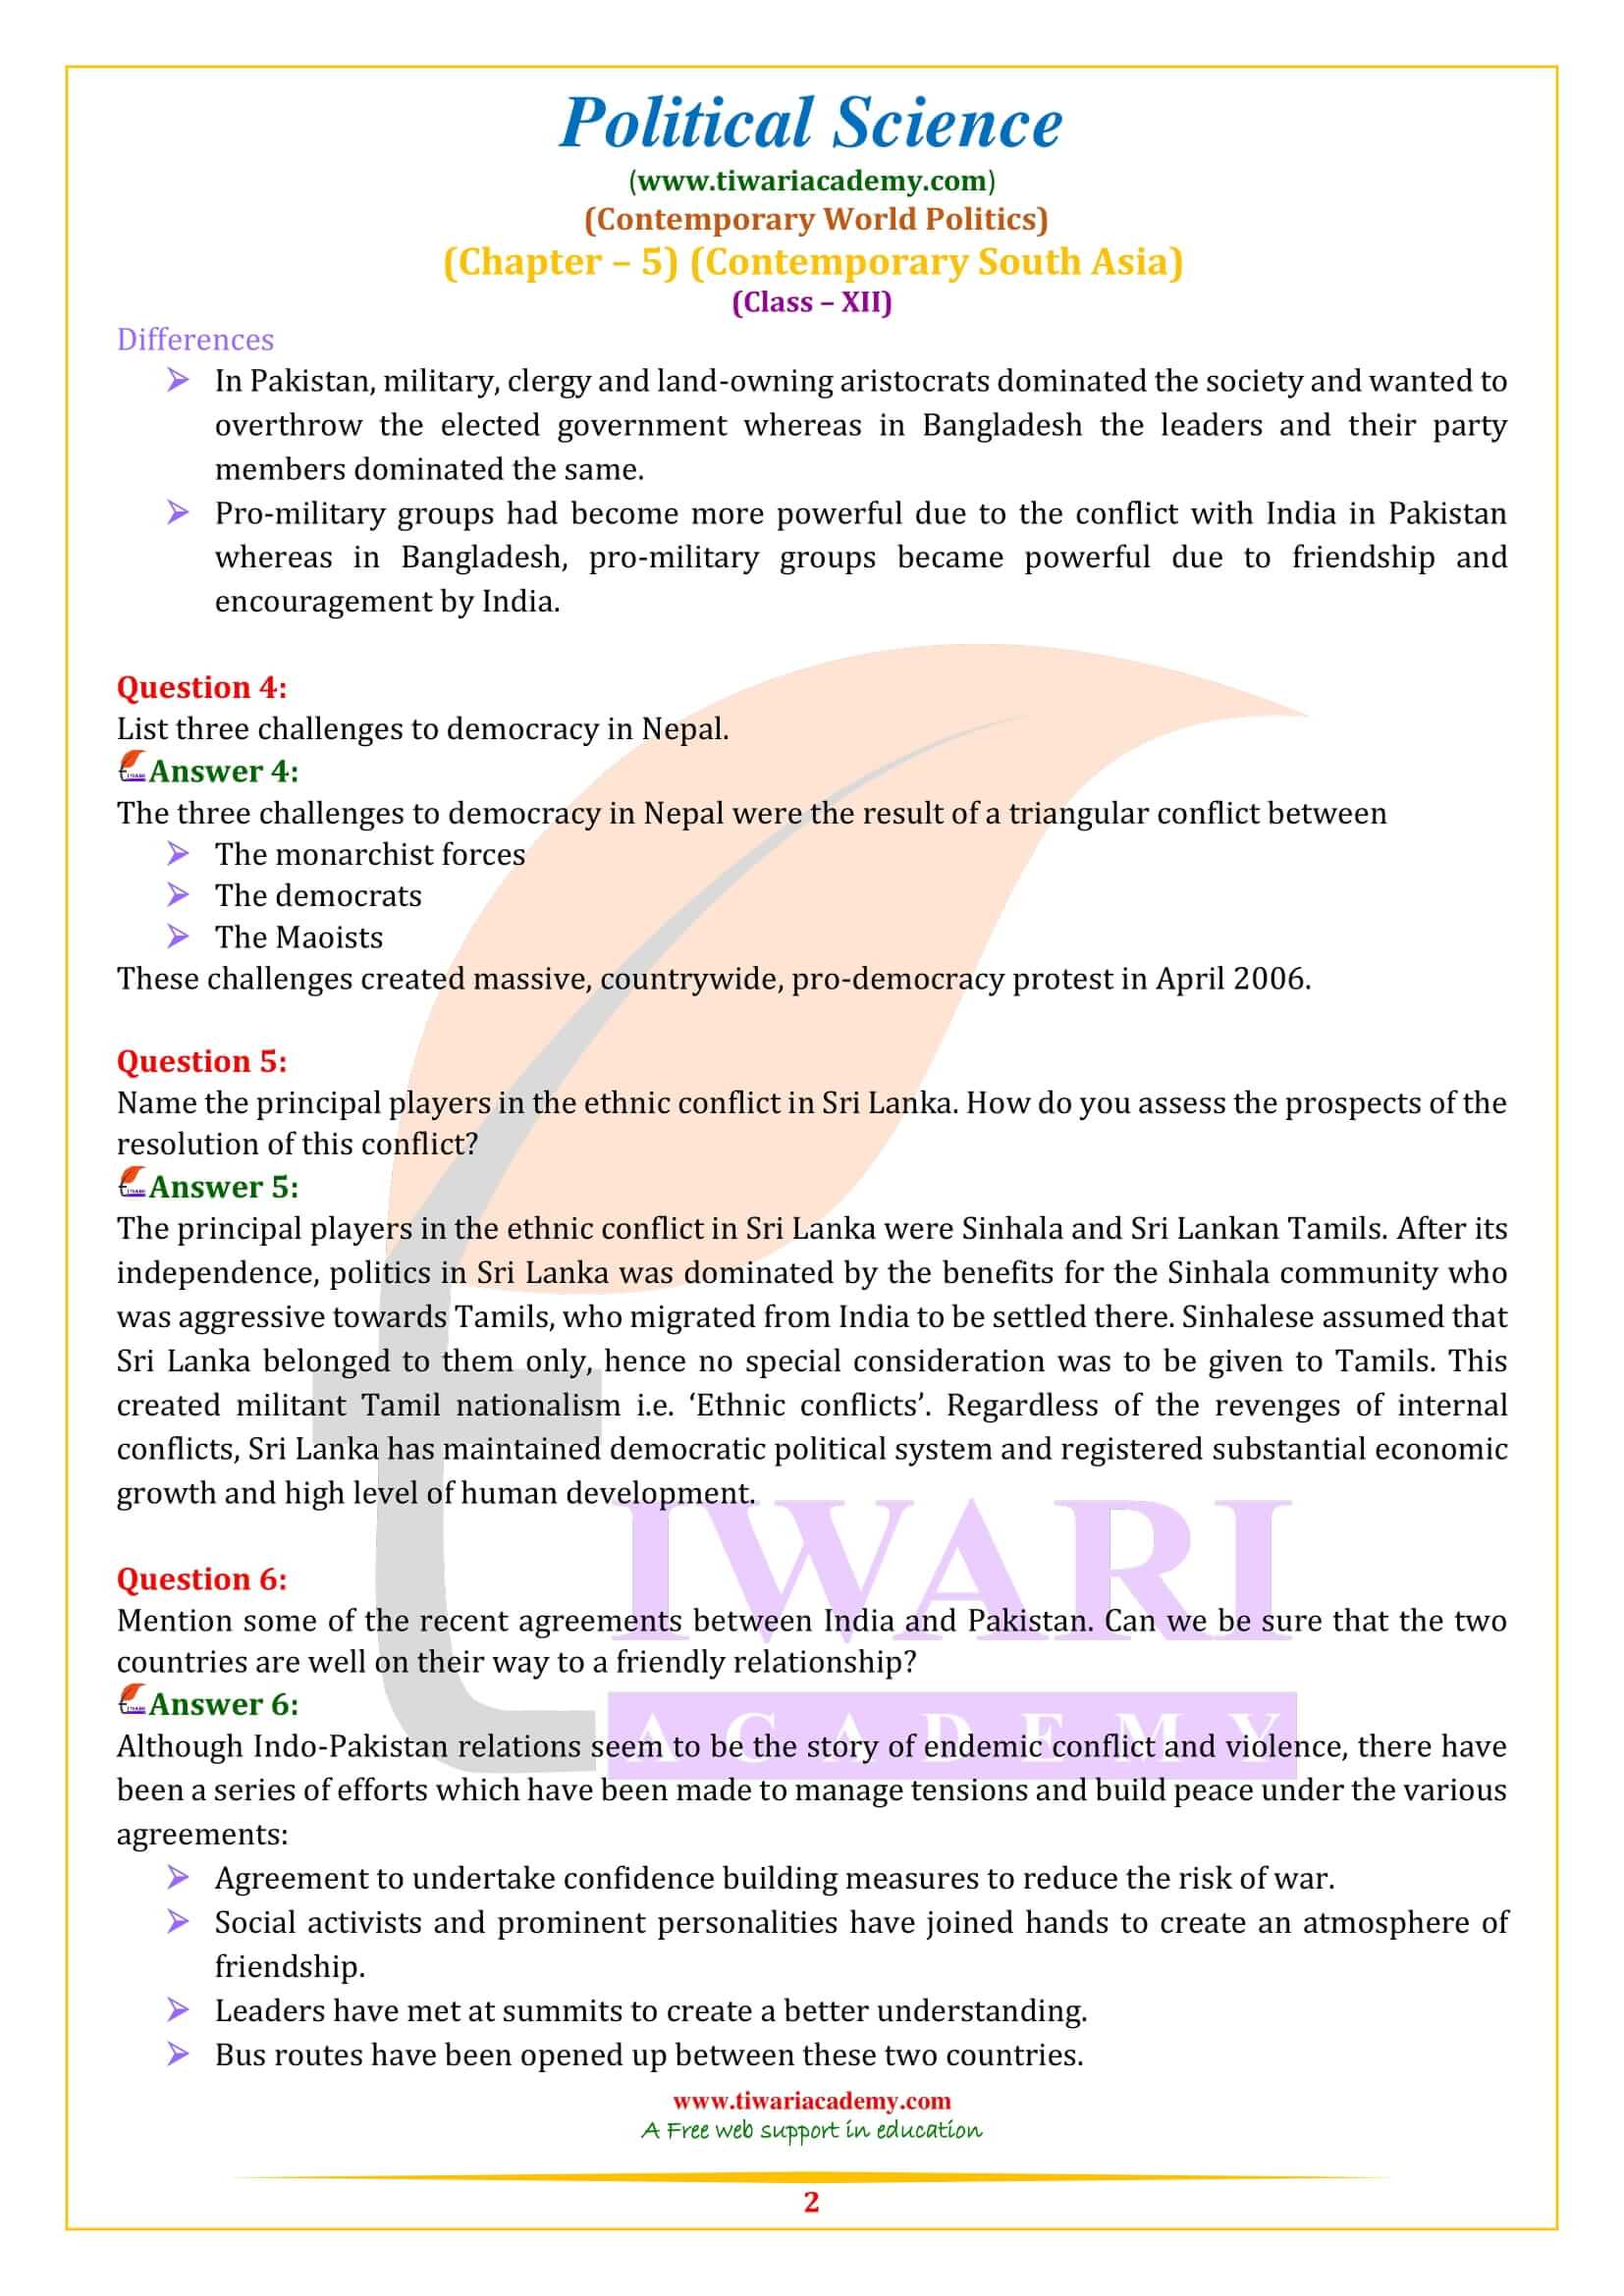 NCERT Solutions for Class 12 Political Science Chapter 5